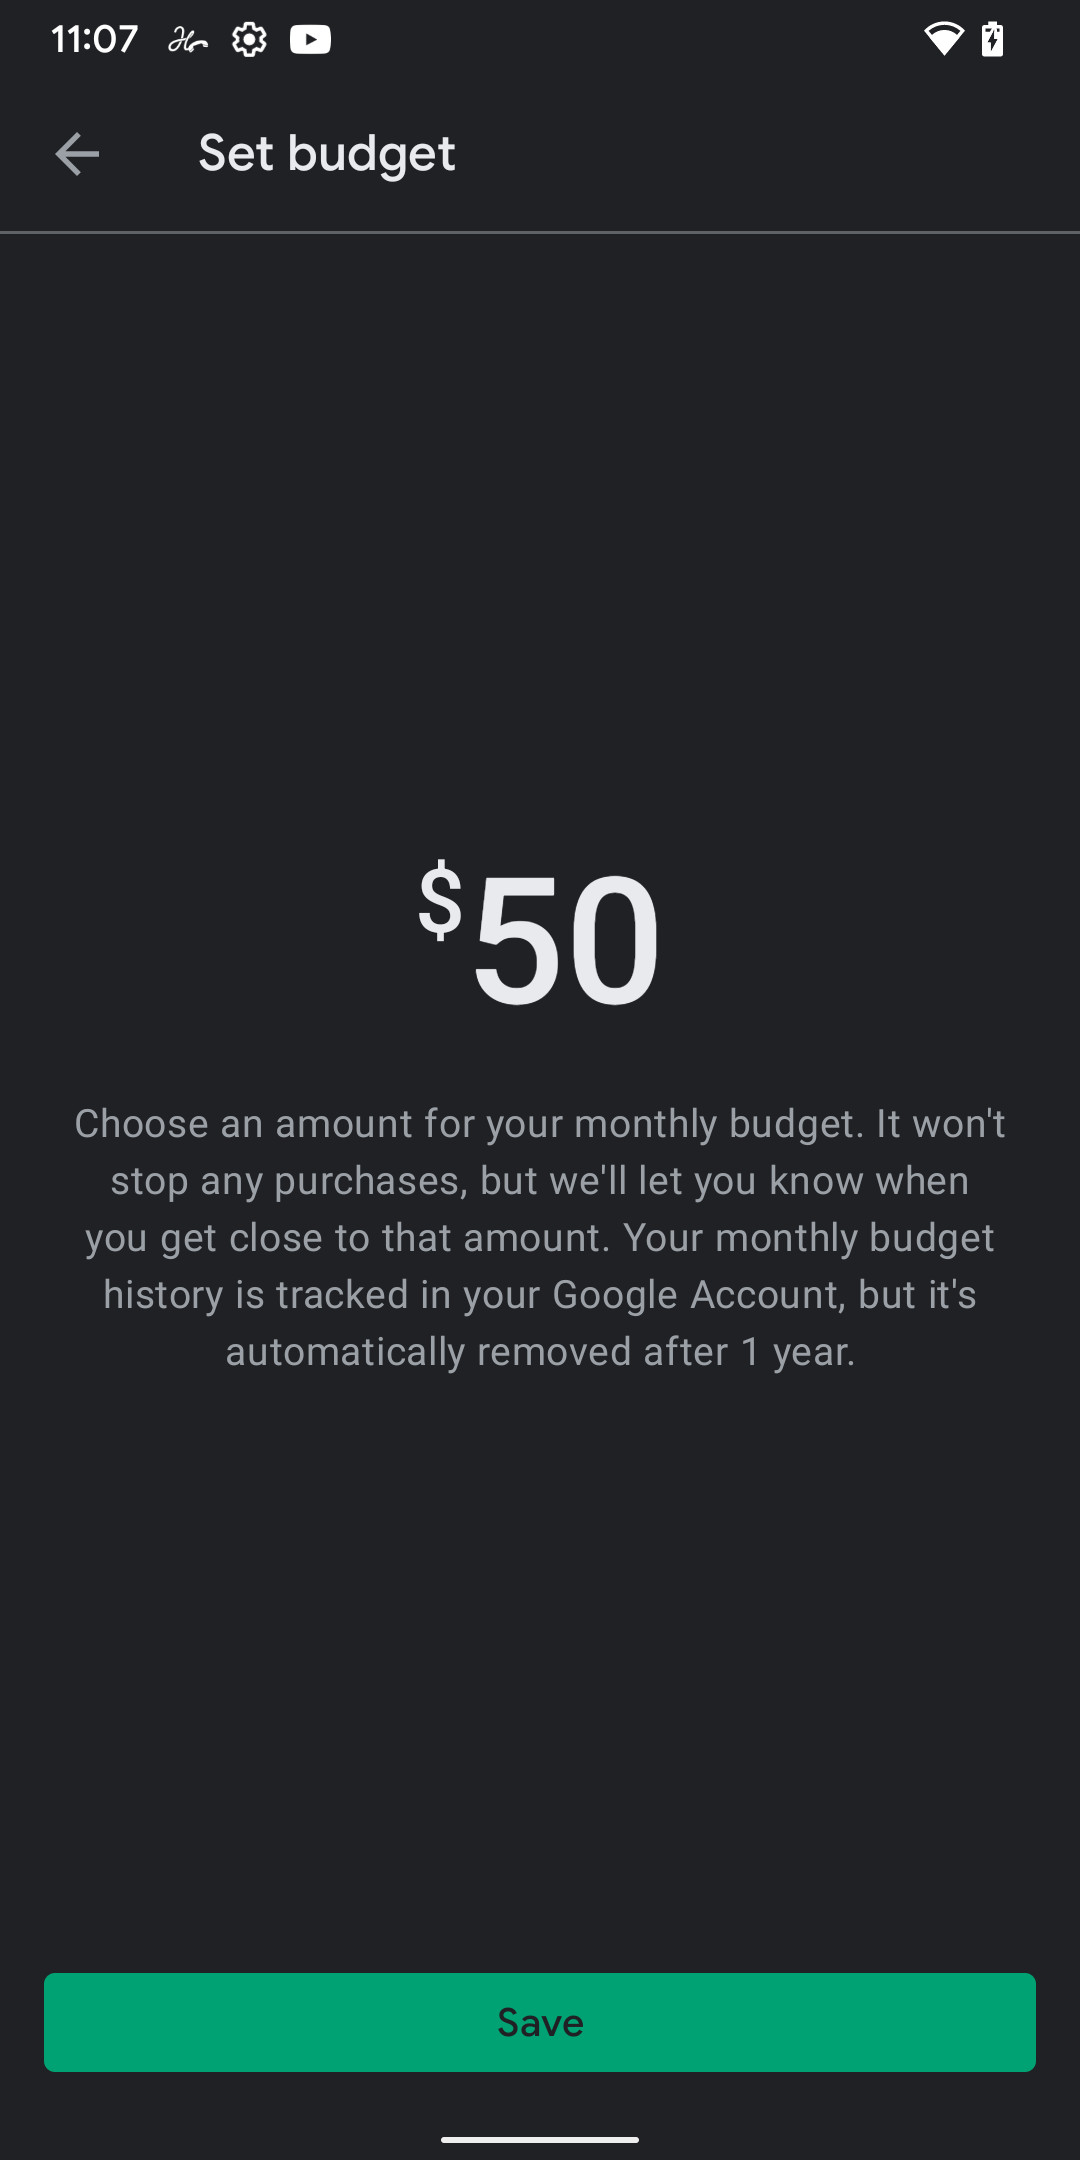 Choose an amount for your budget.